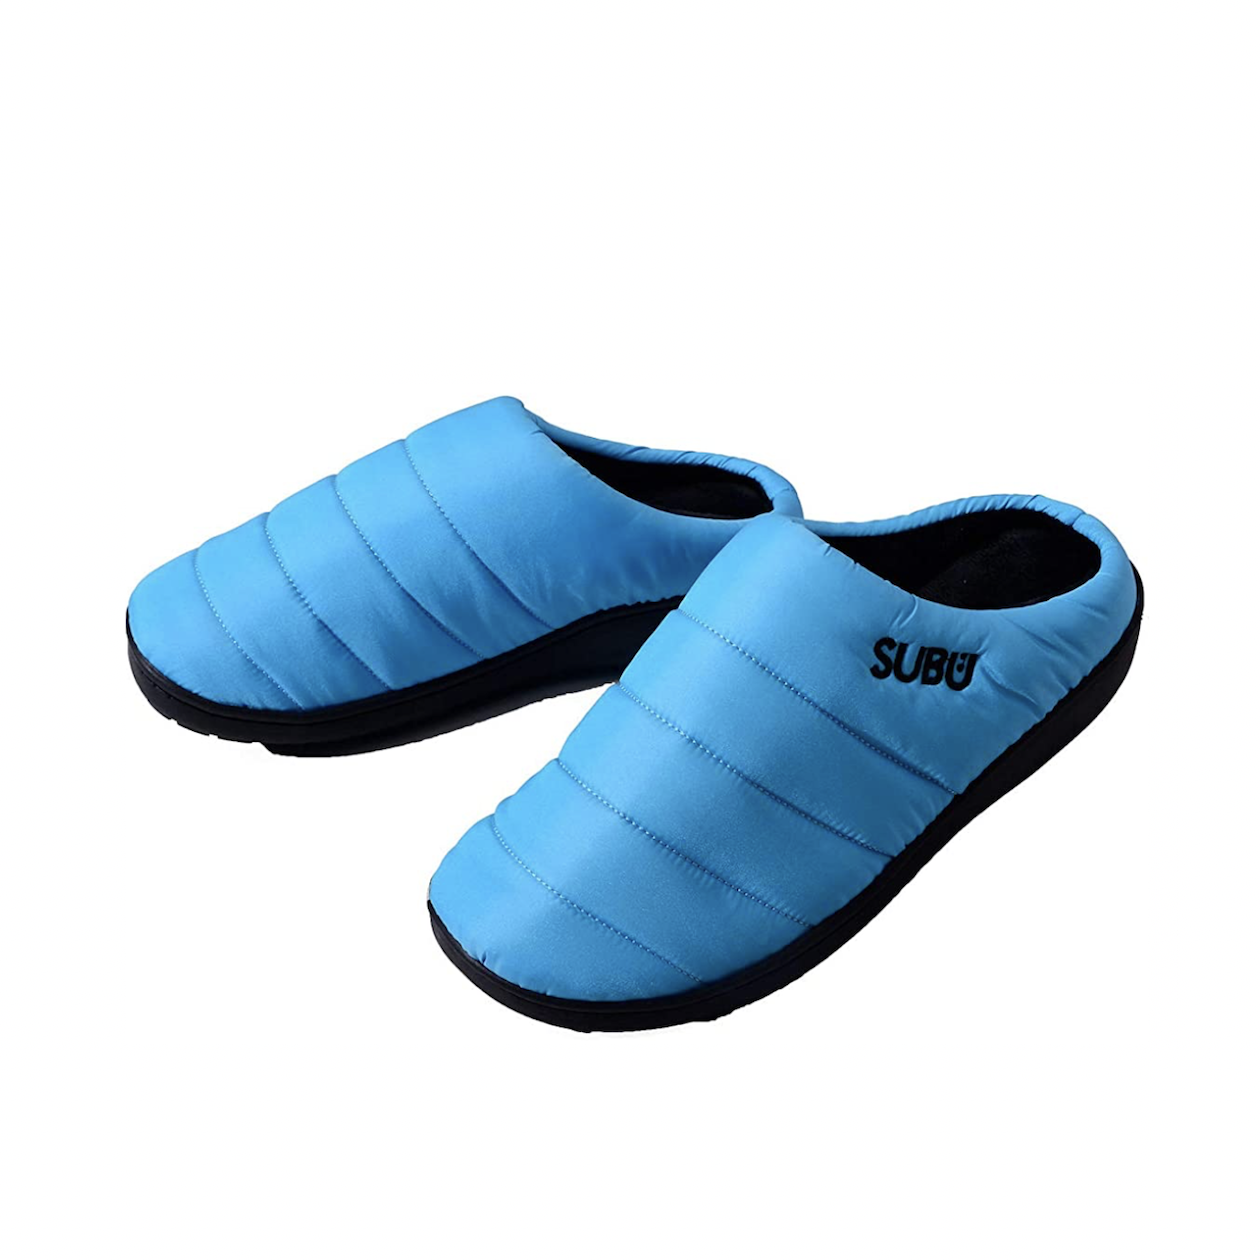 SUBU Slippers Blue 0 size 5.5-6.5 - Get 